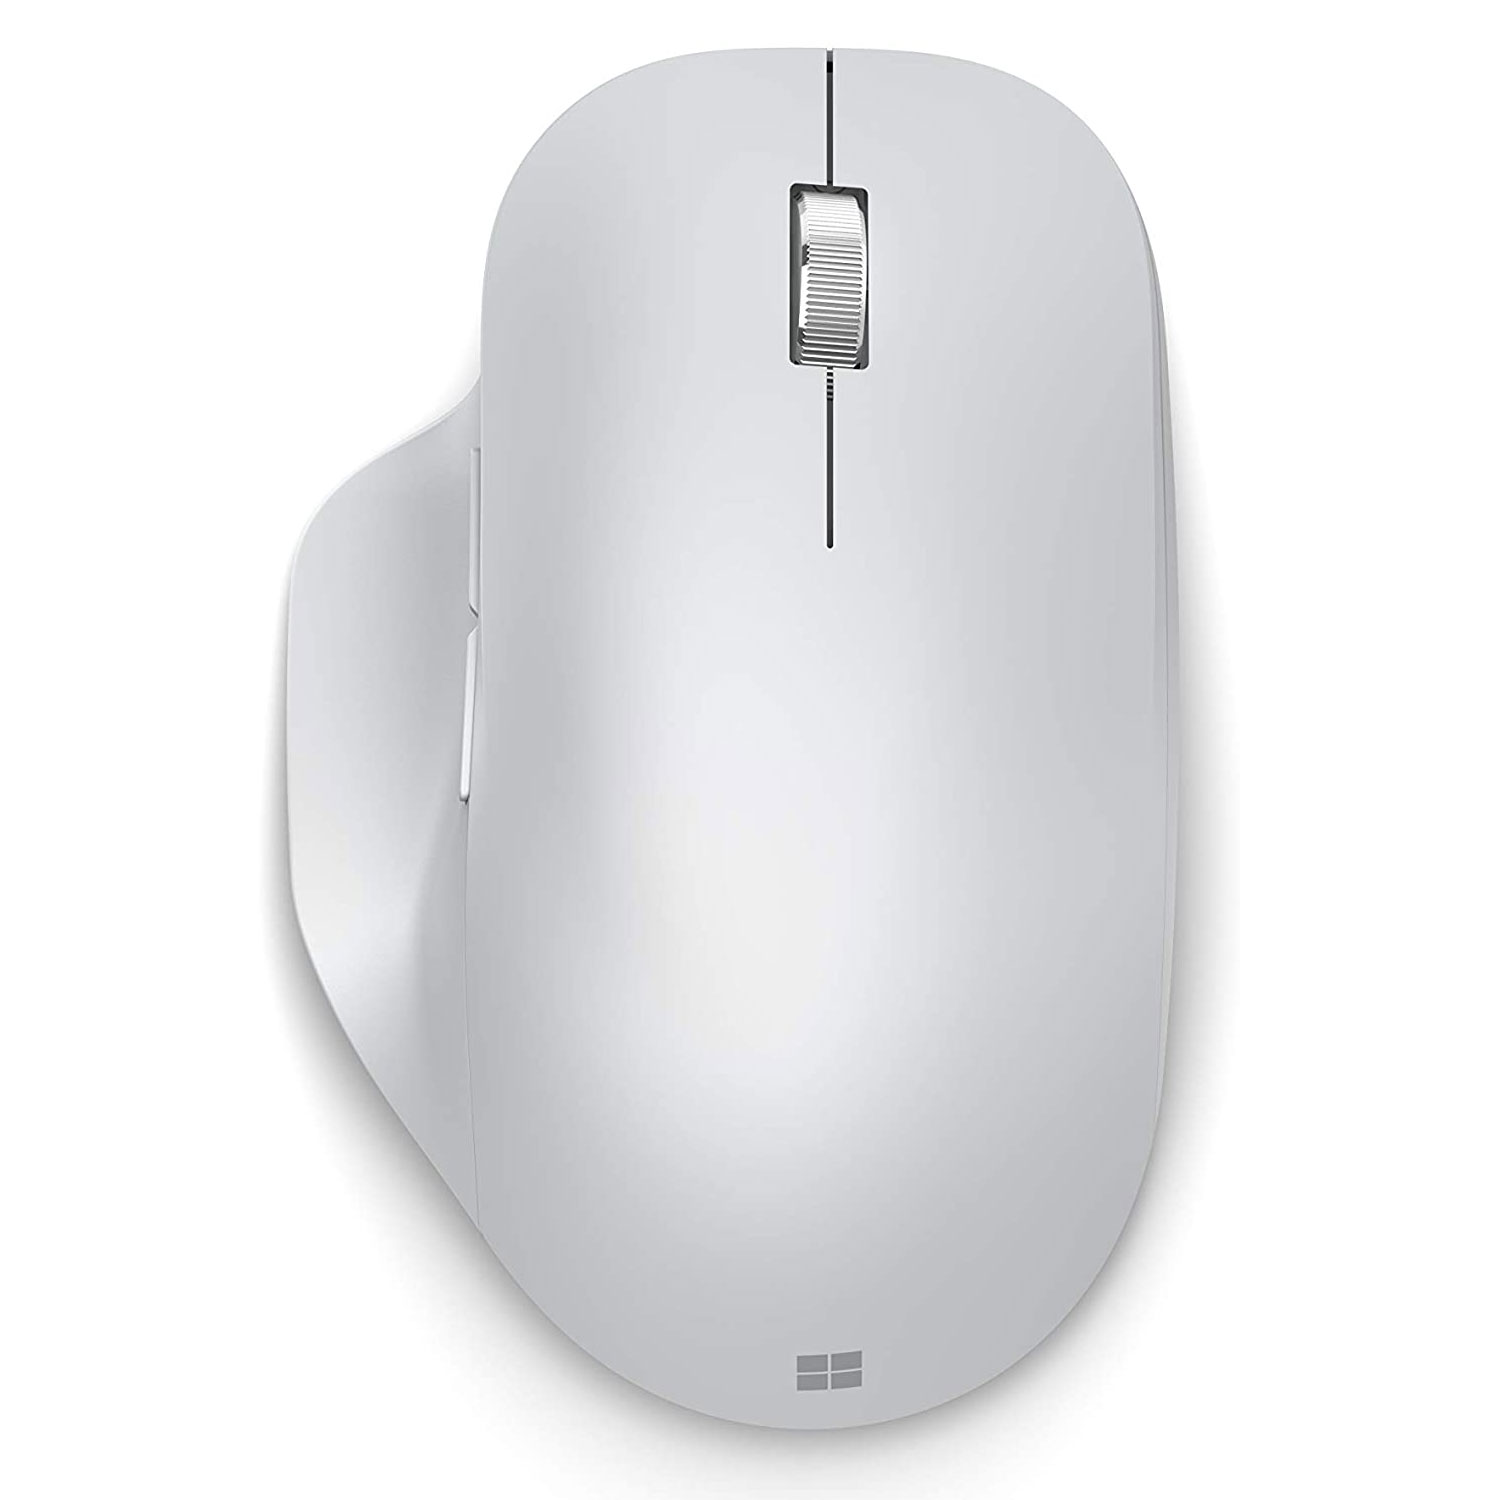 Microsoft Bluetooth Ergonomic Mouse Glacier Grey Wireless mouse - right-handed - 5 buttons